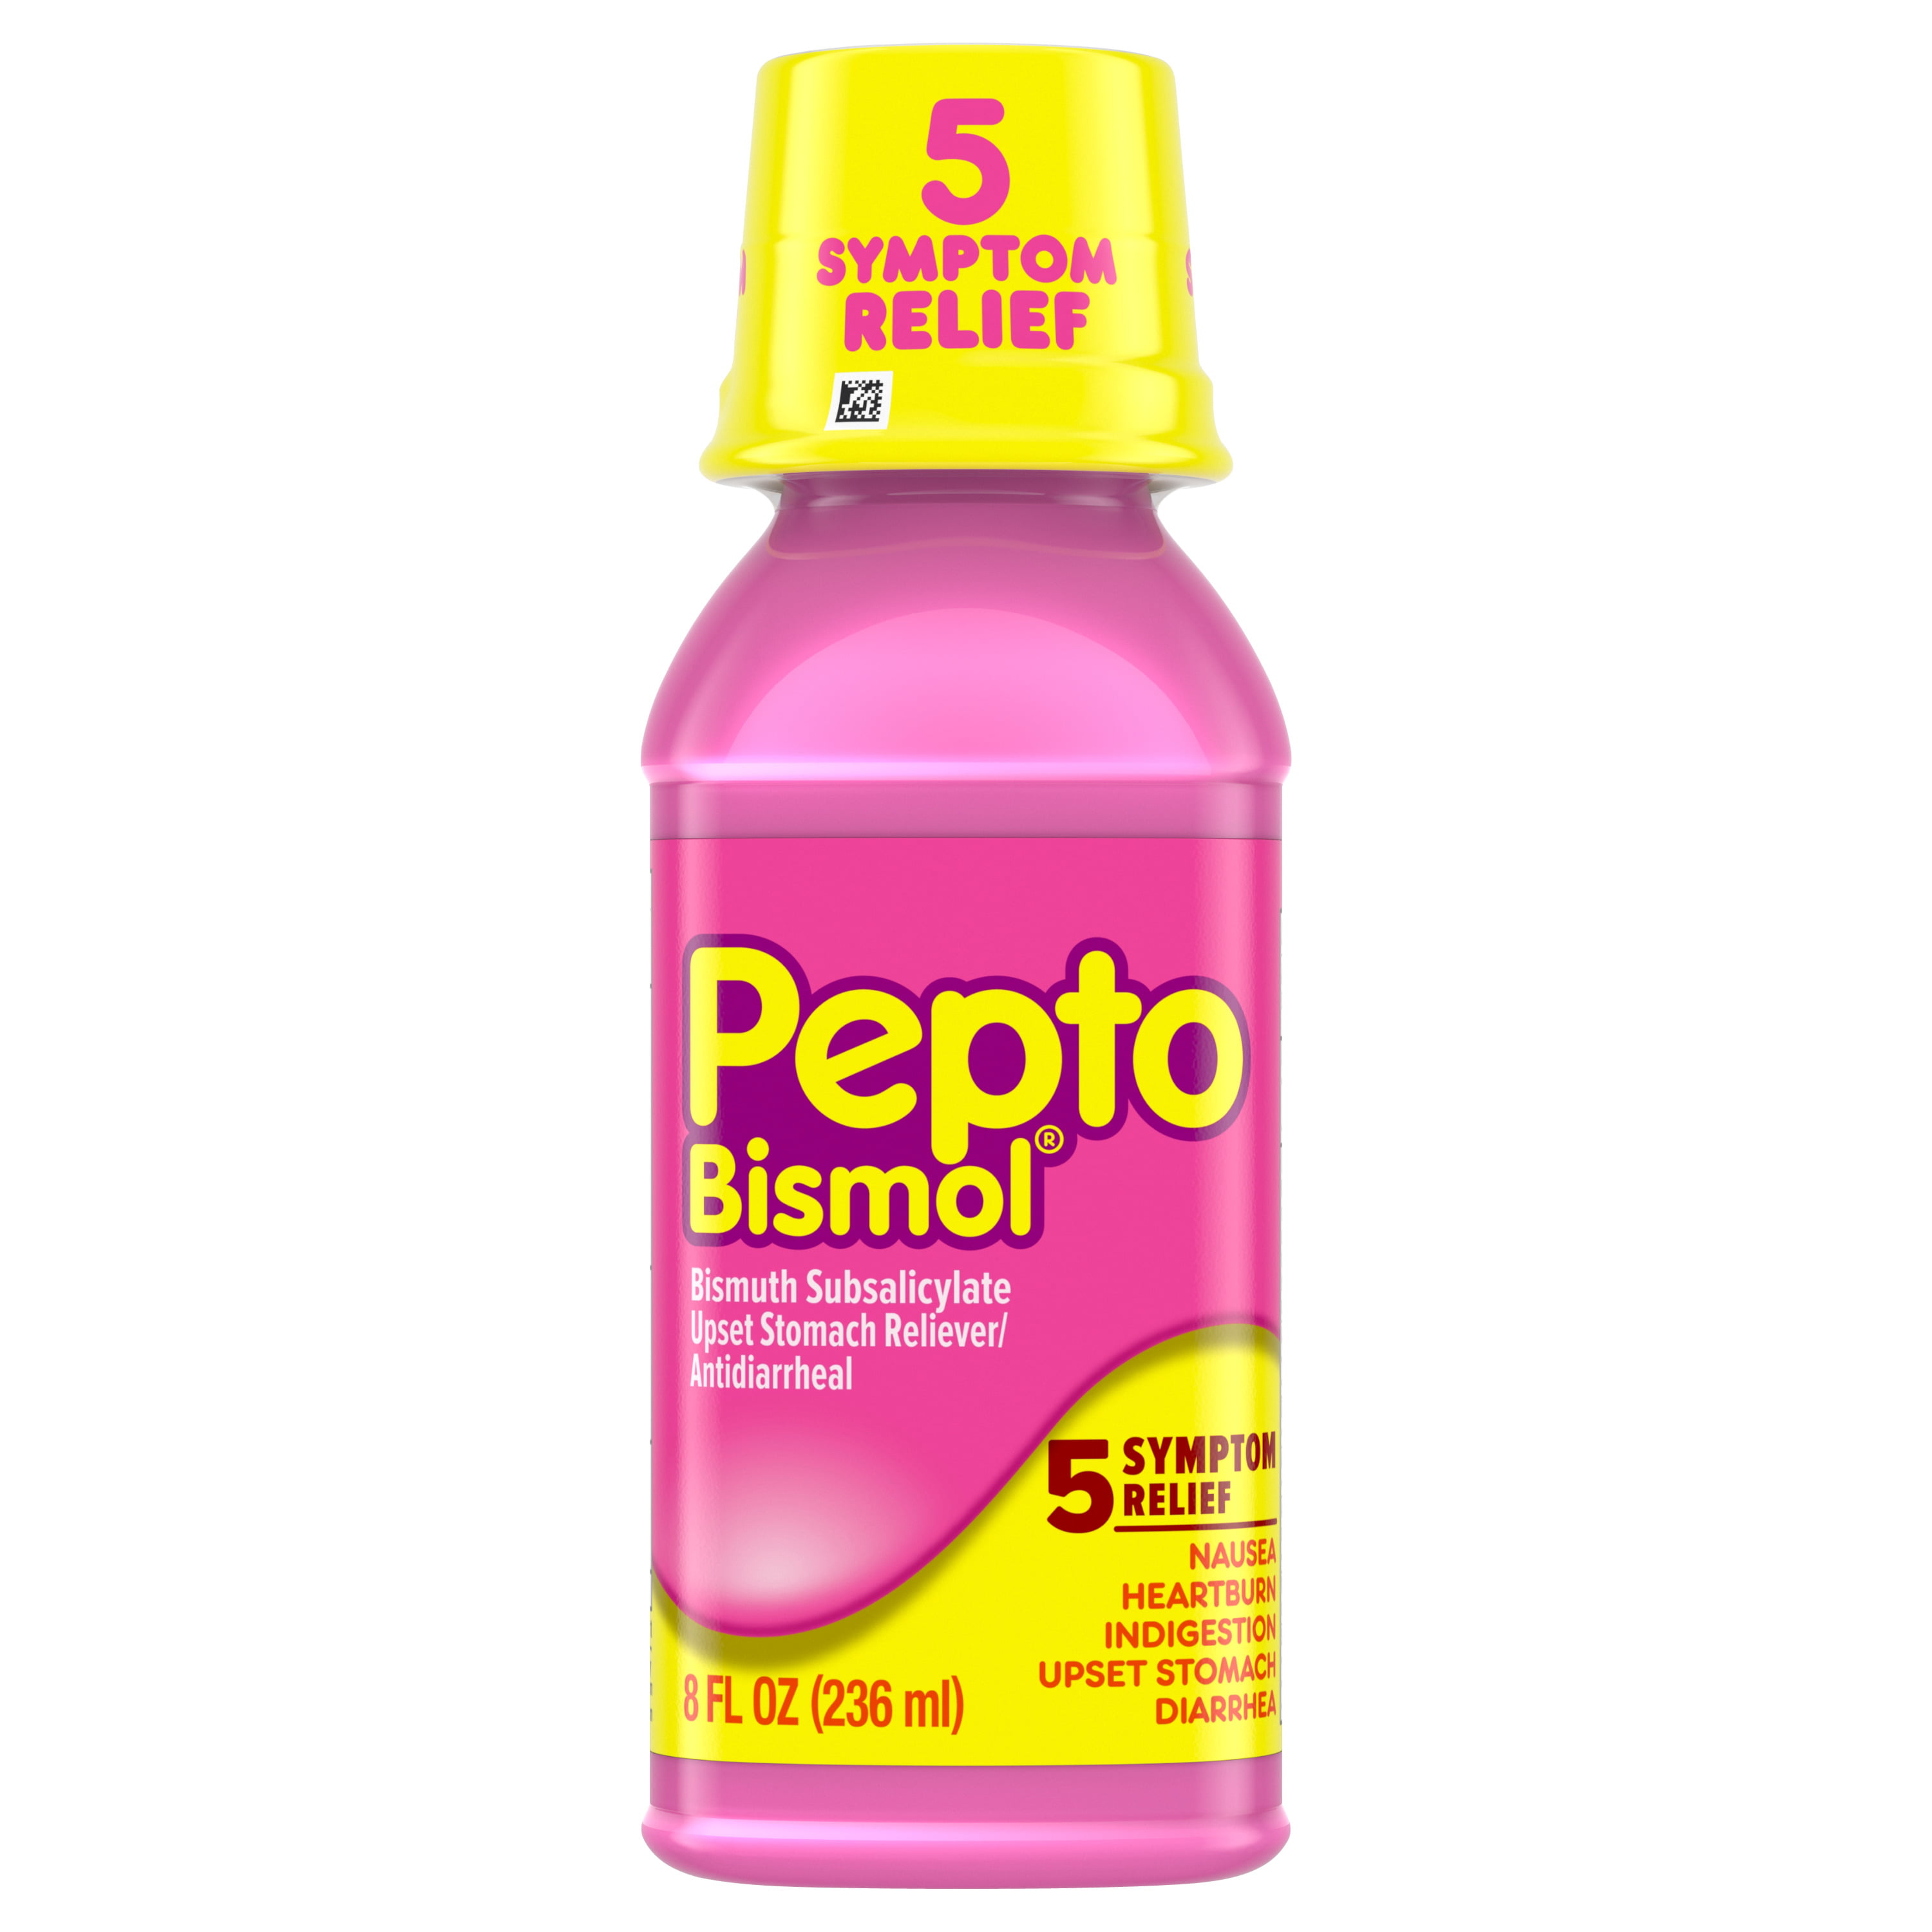 what can i give my dog for upset stomach pepto bismol